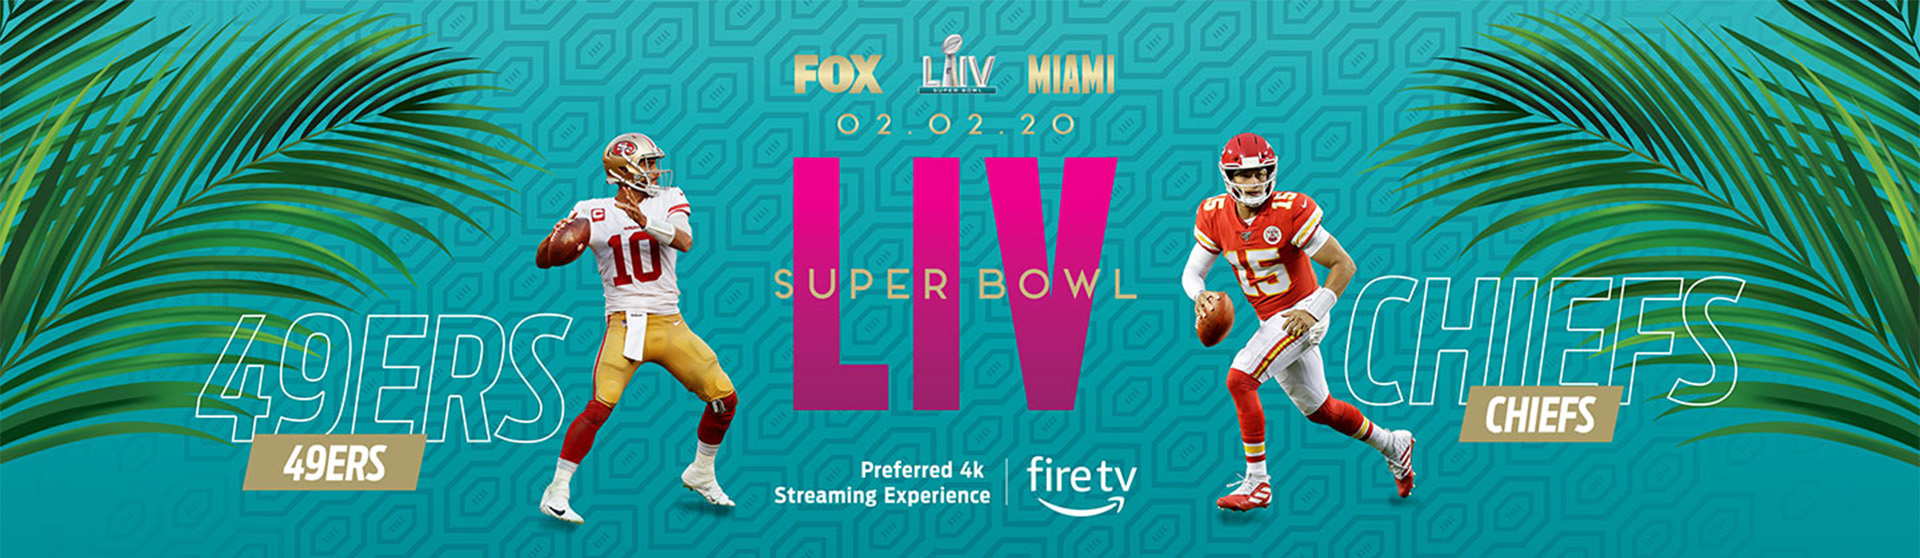 free ways to watch the super bowl